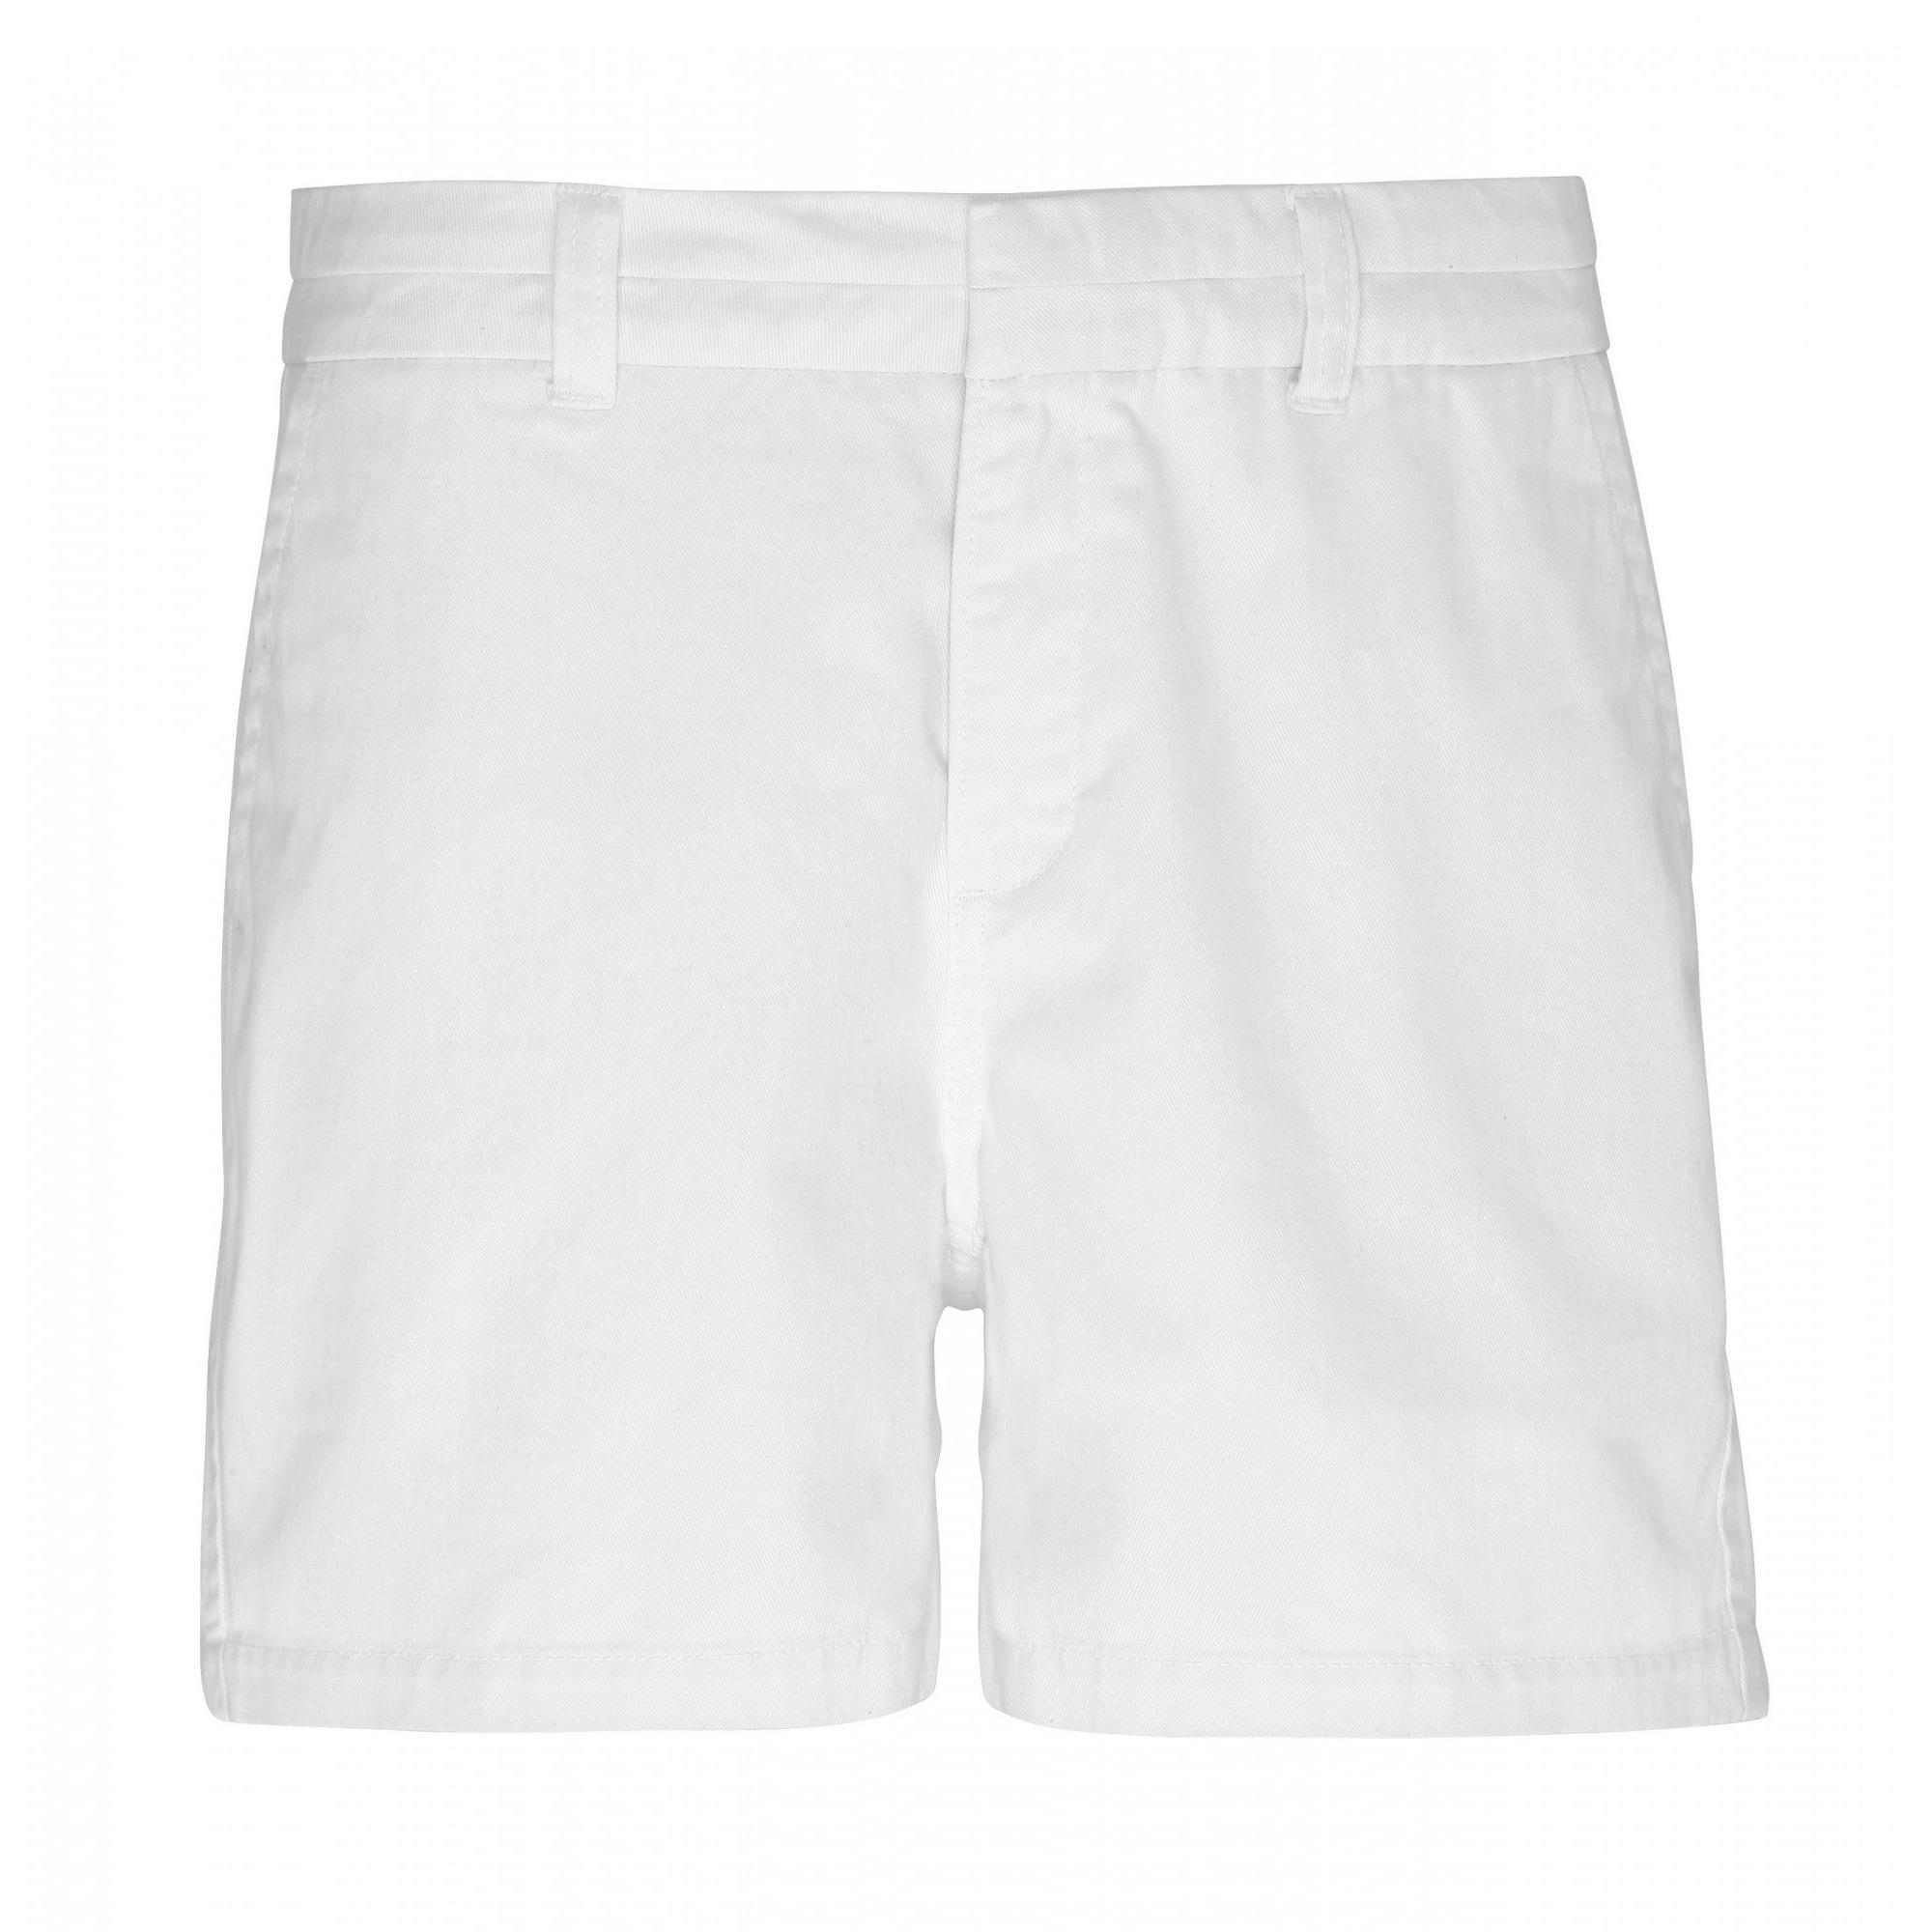 Asquith & Fox Womens/Ladies Classic Fit Shorts (White) (2XL)